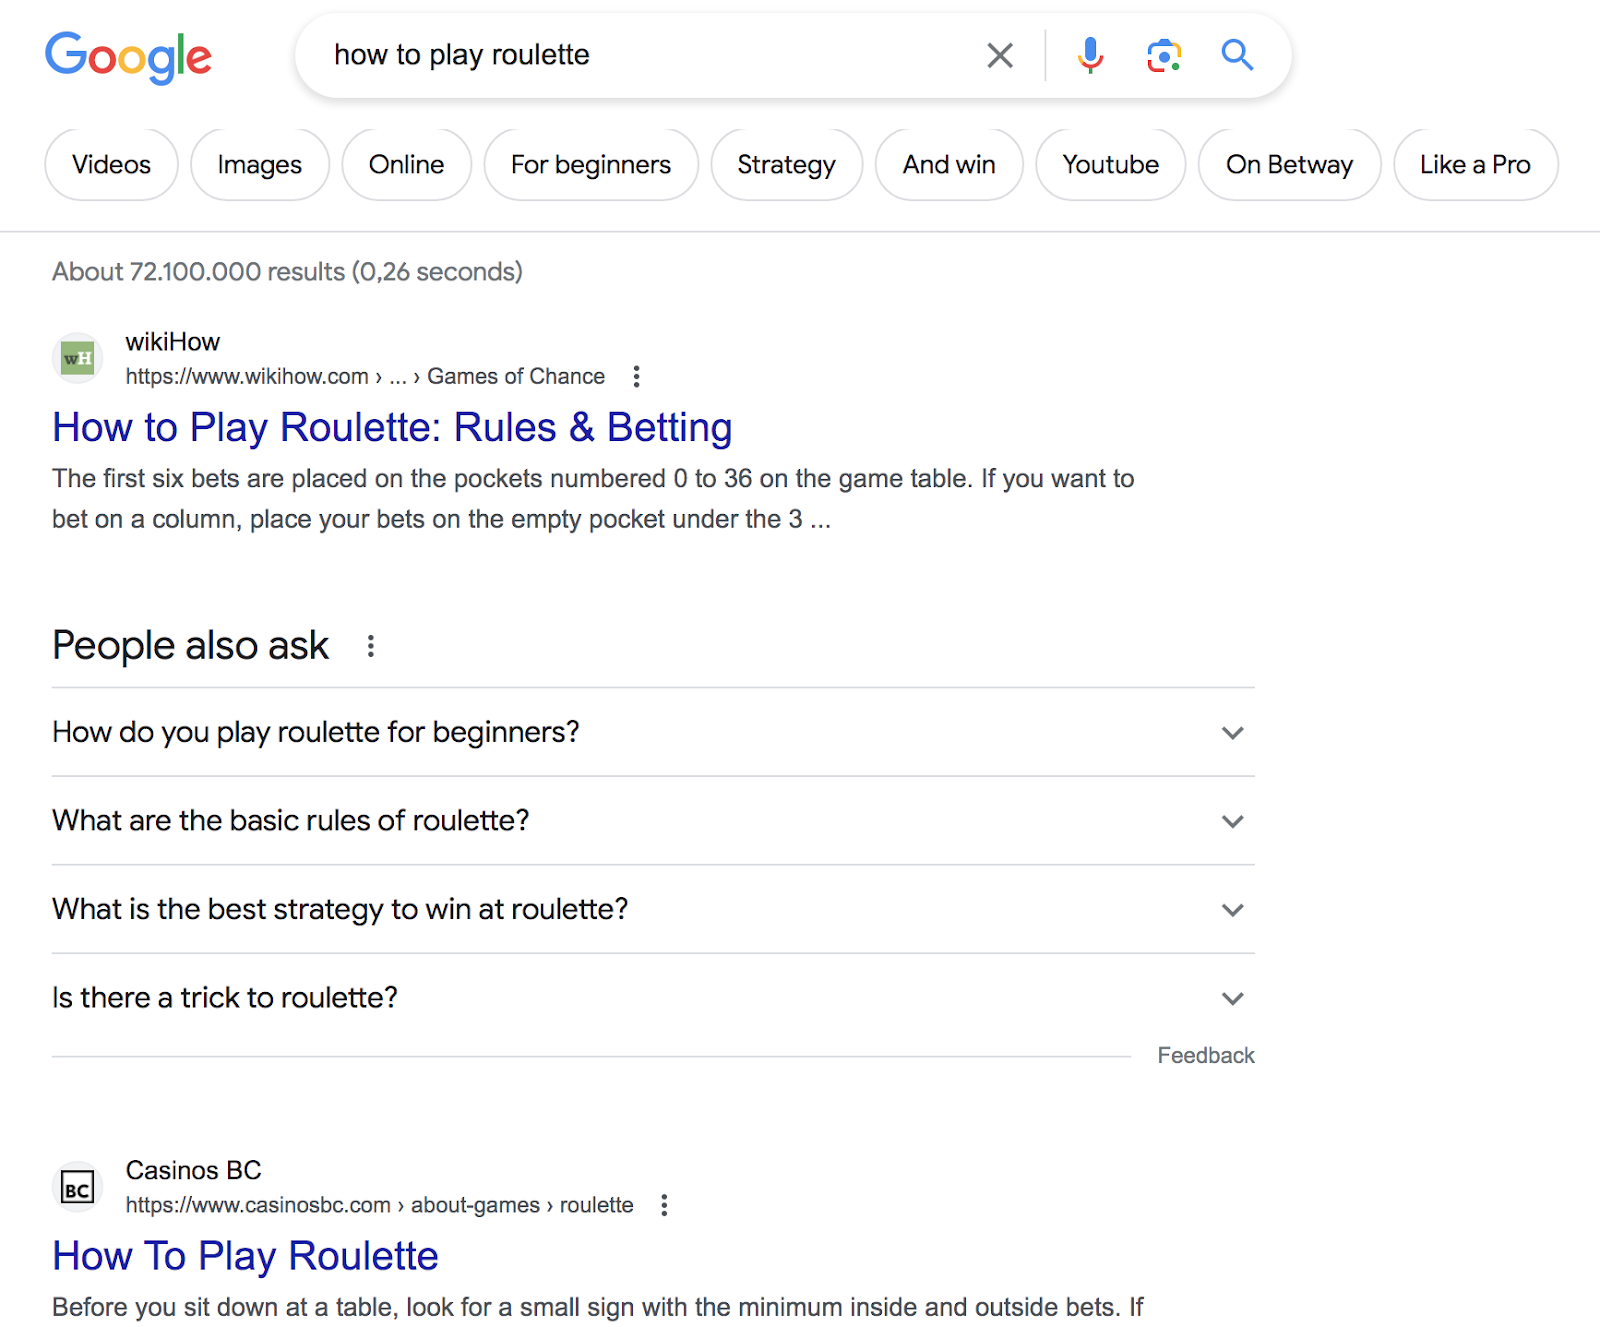 Google's SERP for "how to play roulette" query